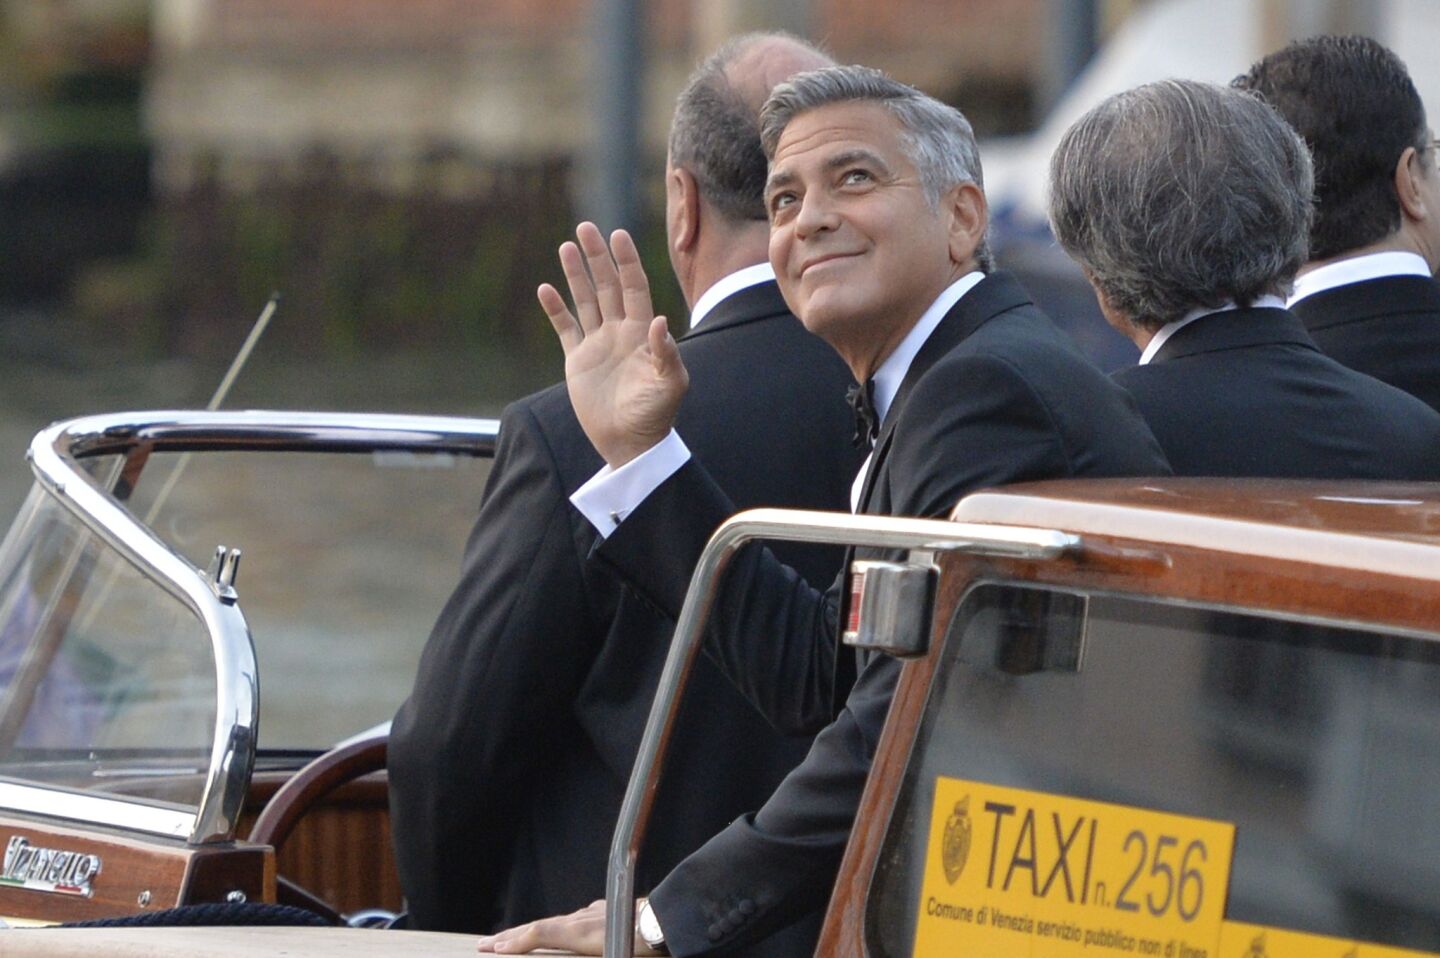 George Clooney waves to fans from the water taxi taking him from the Hotel Cipriani to the venue where he'll marry Amal Alamuddin on Saturday night.